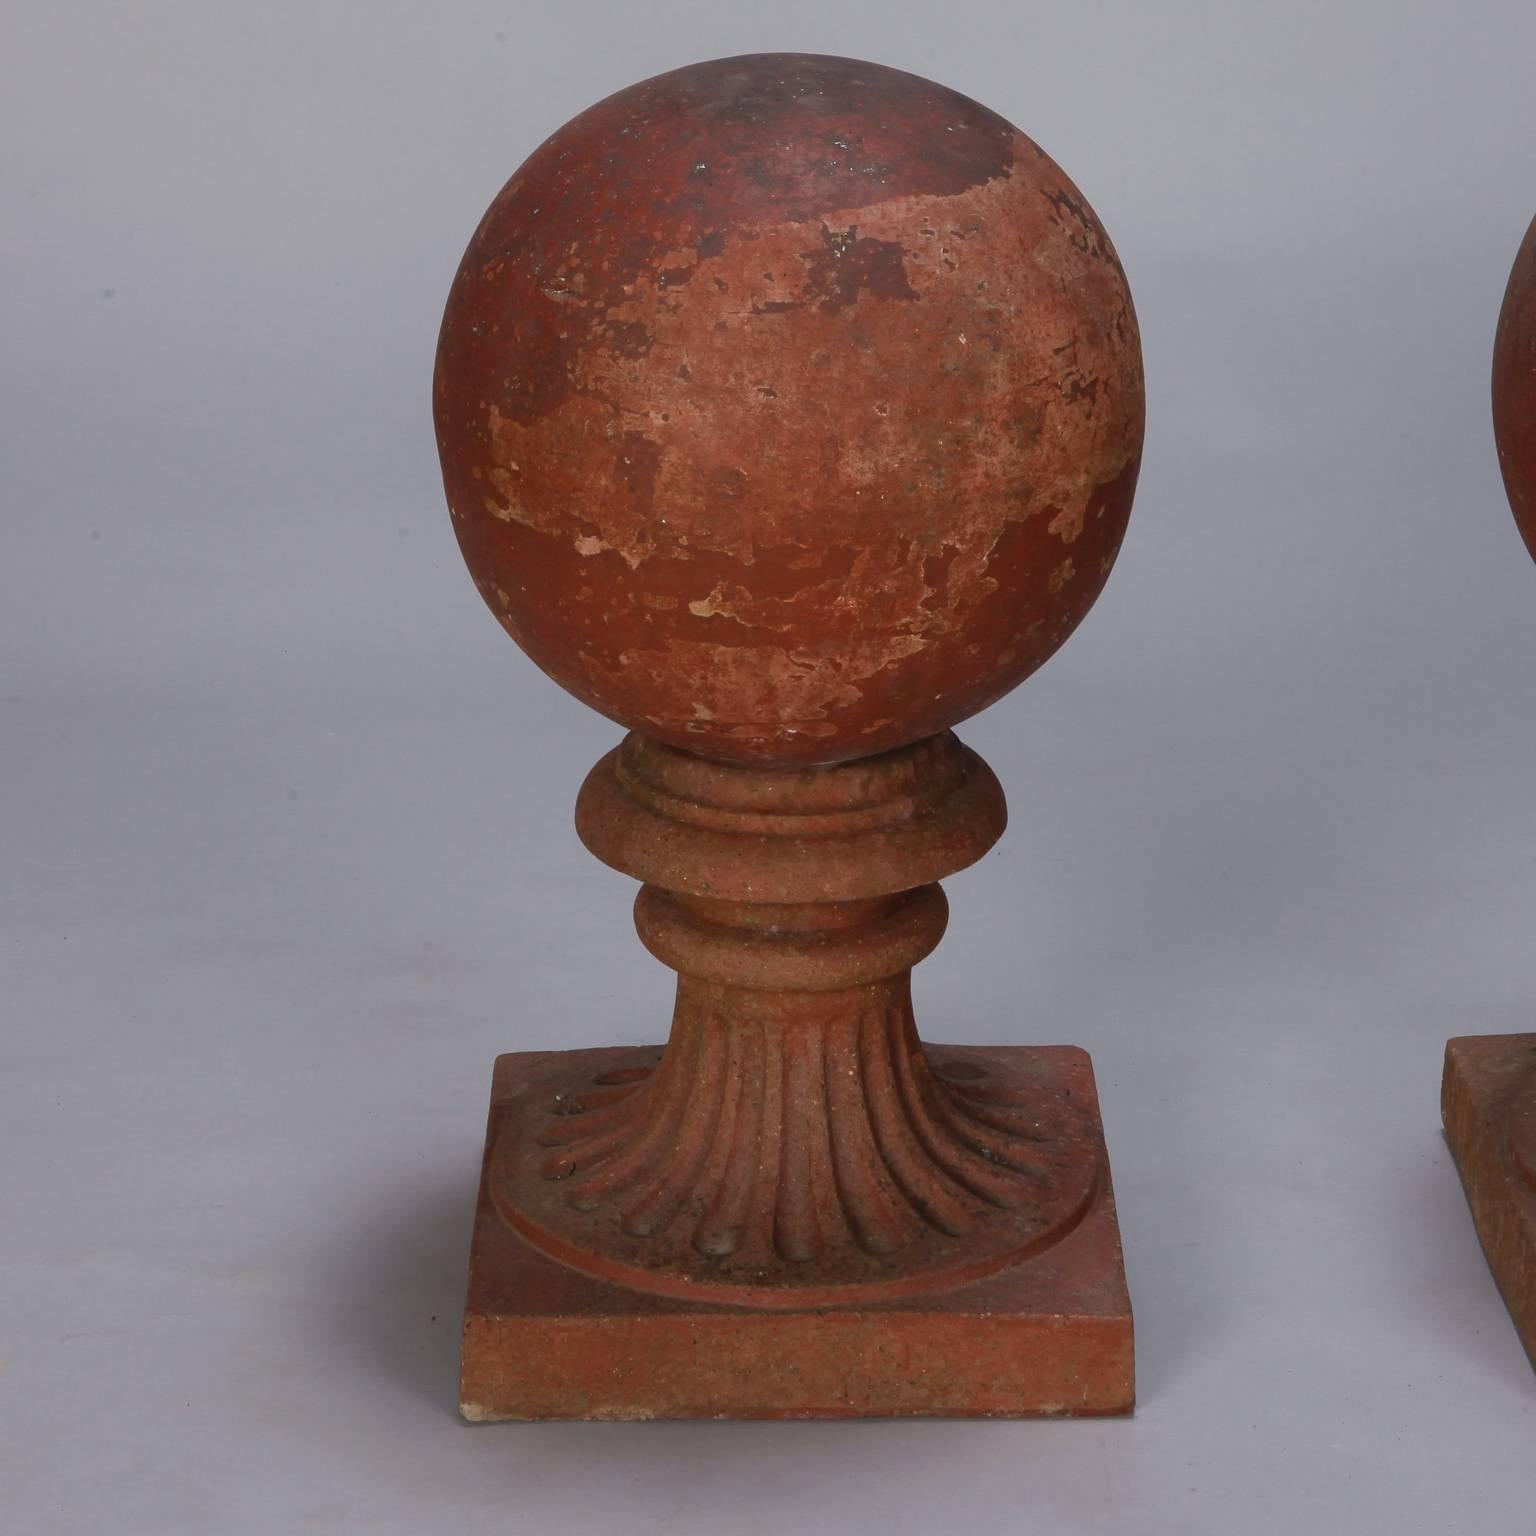 Large terra cotta round finial on pedestal base, circa 1930s. Salvaged from an outdoor European structure with expected wear and patina to surface. Sold and priced individually. Two available.

   